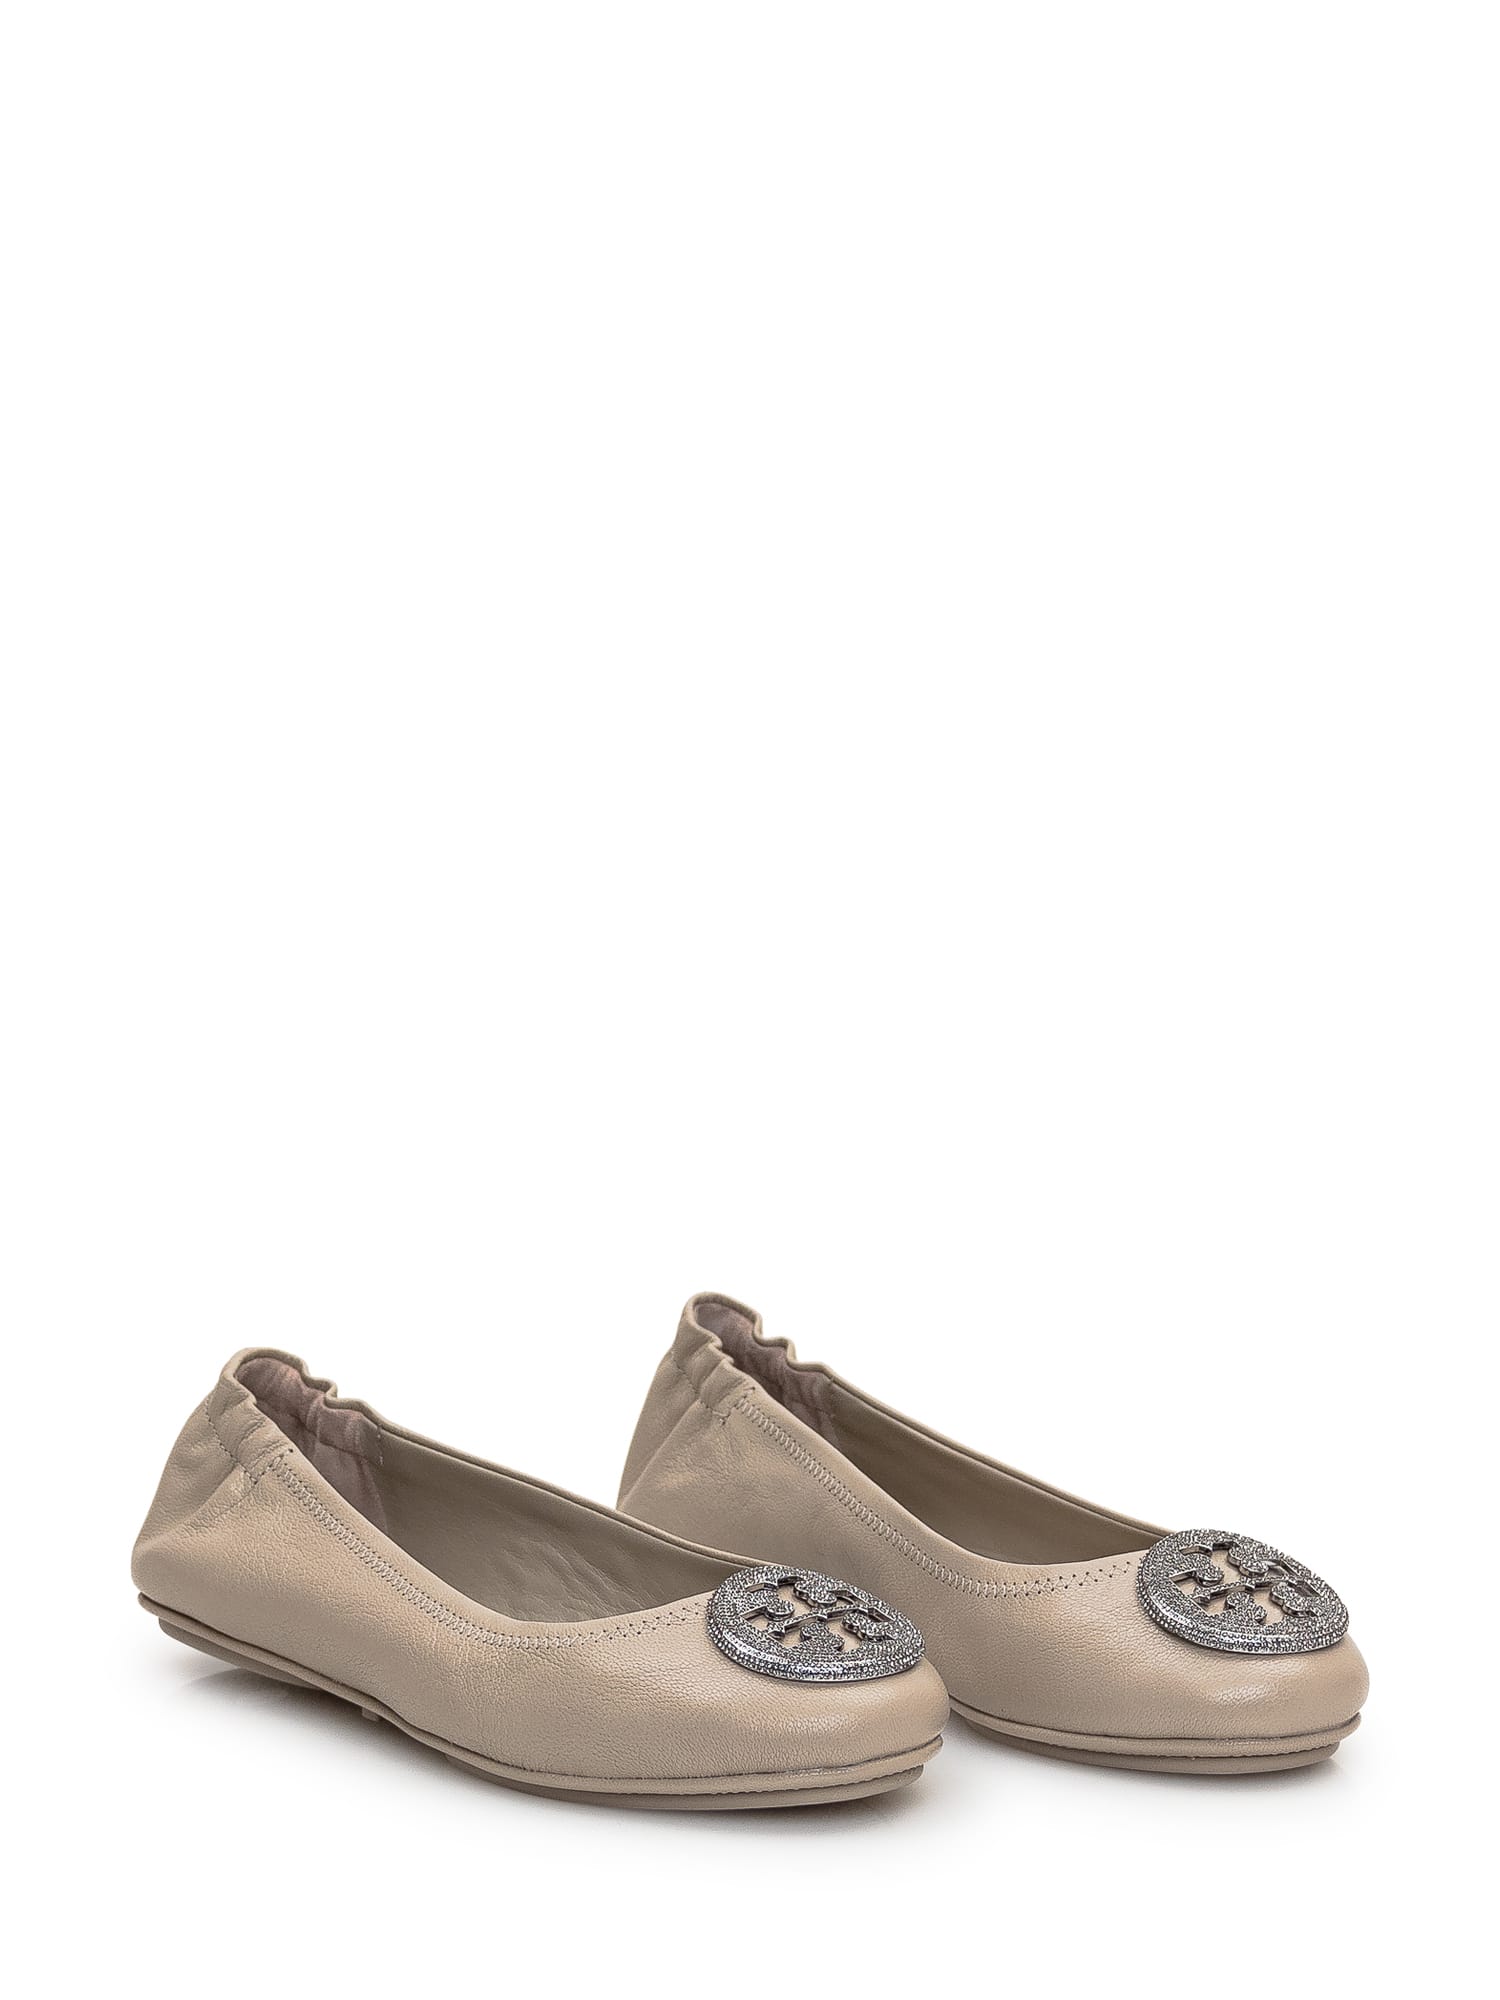 Shop Tory Burch Minnie Ballet In Stone Gray Silver